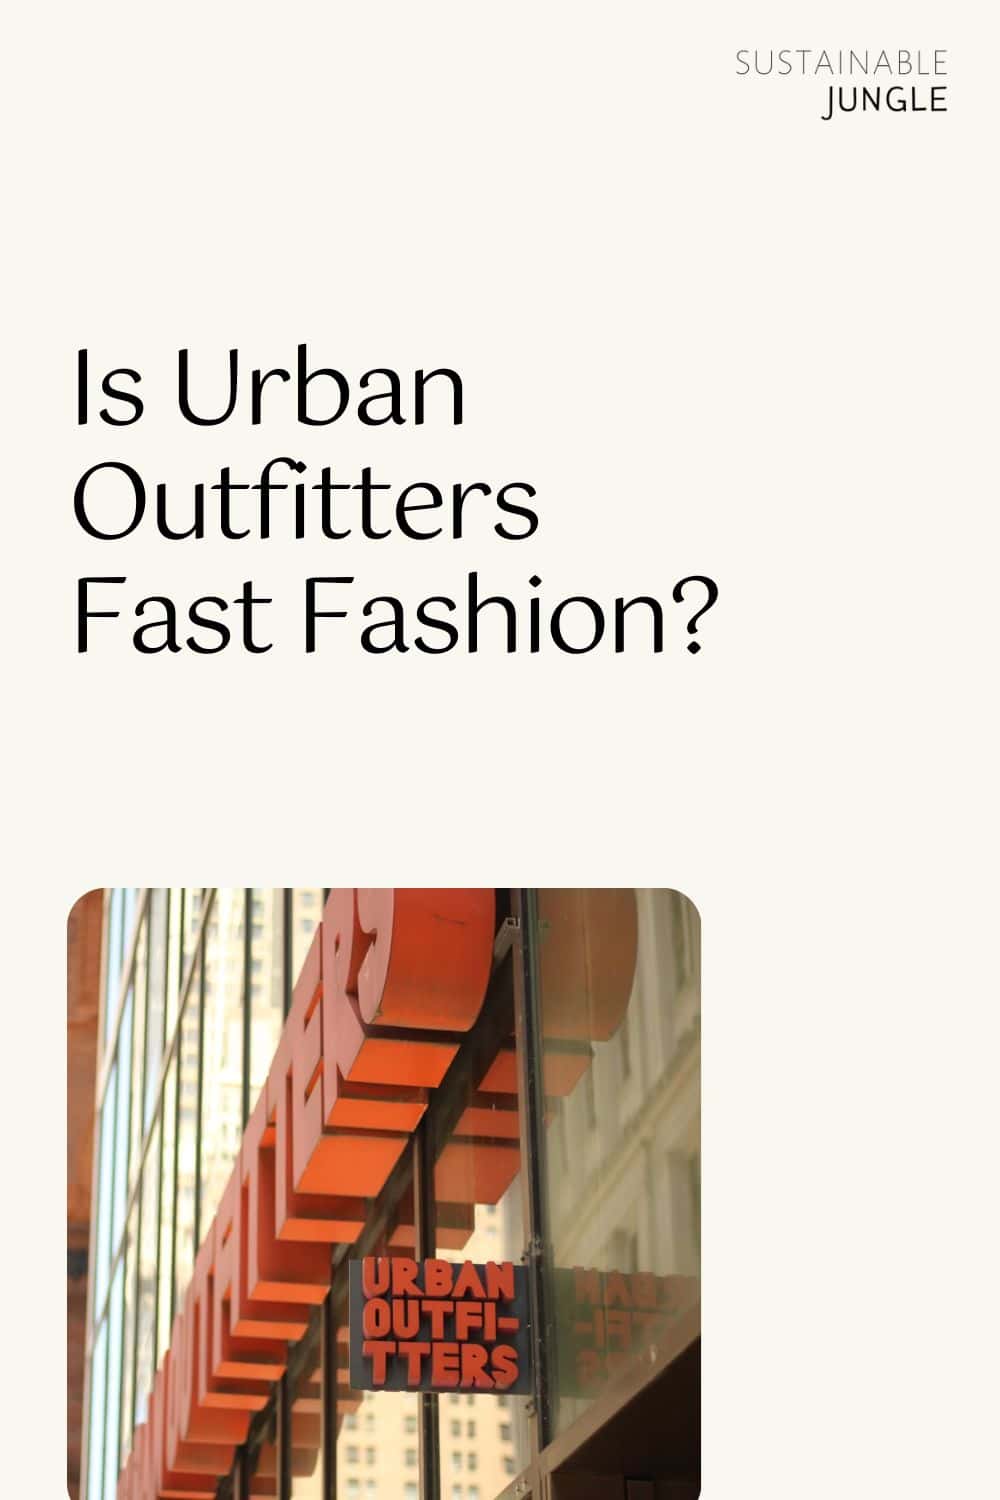 Is Urban Outfitters Fast Fashion? Image by Chinmay Wyawahare #isurbanoutfittersfastfashion #isurbanoutfittersethical #urbanoutfitterssustainability #whyisurbanoutfittersbad #isurbanoutfitterssustainable #sustainablejungle